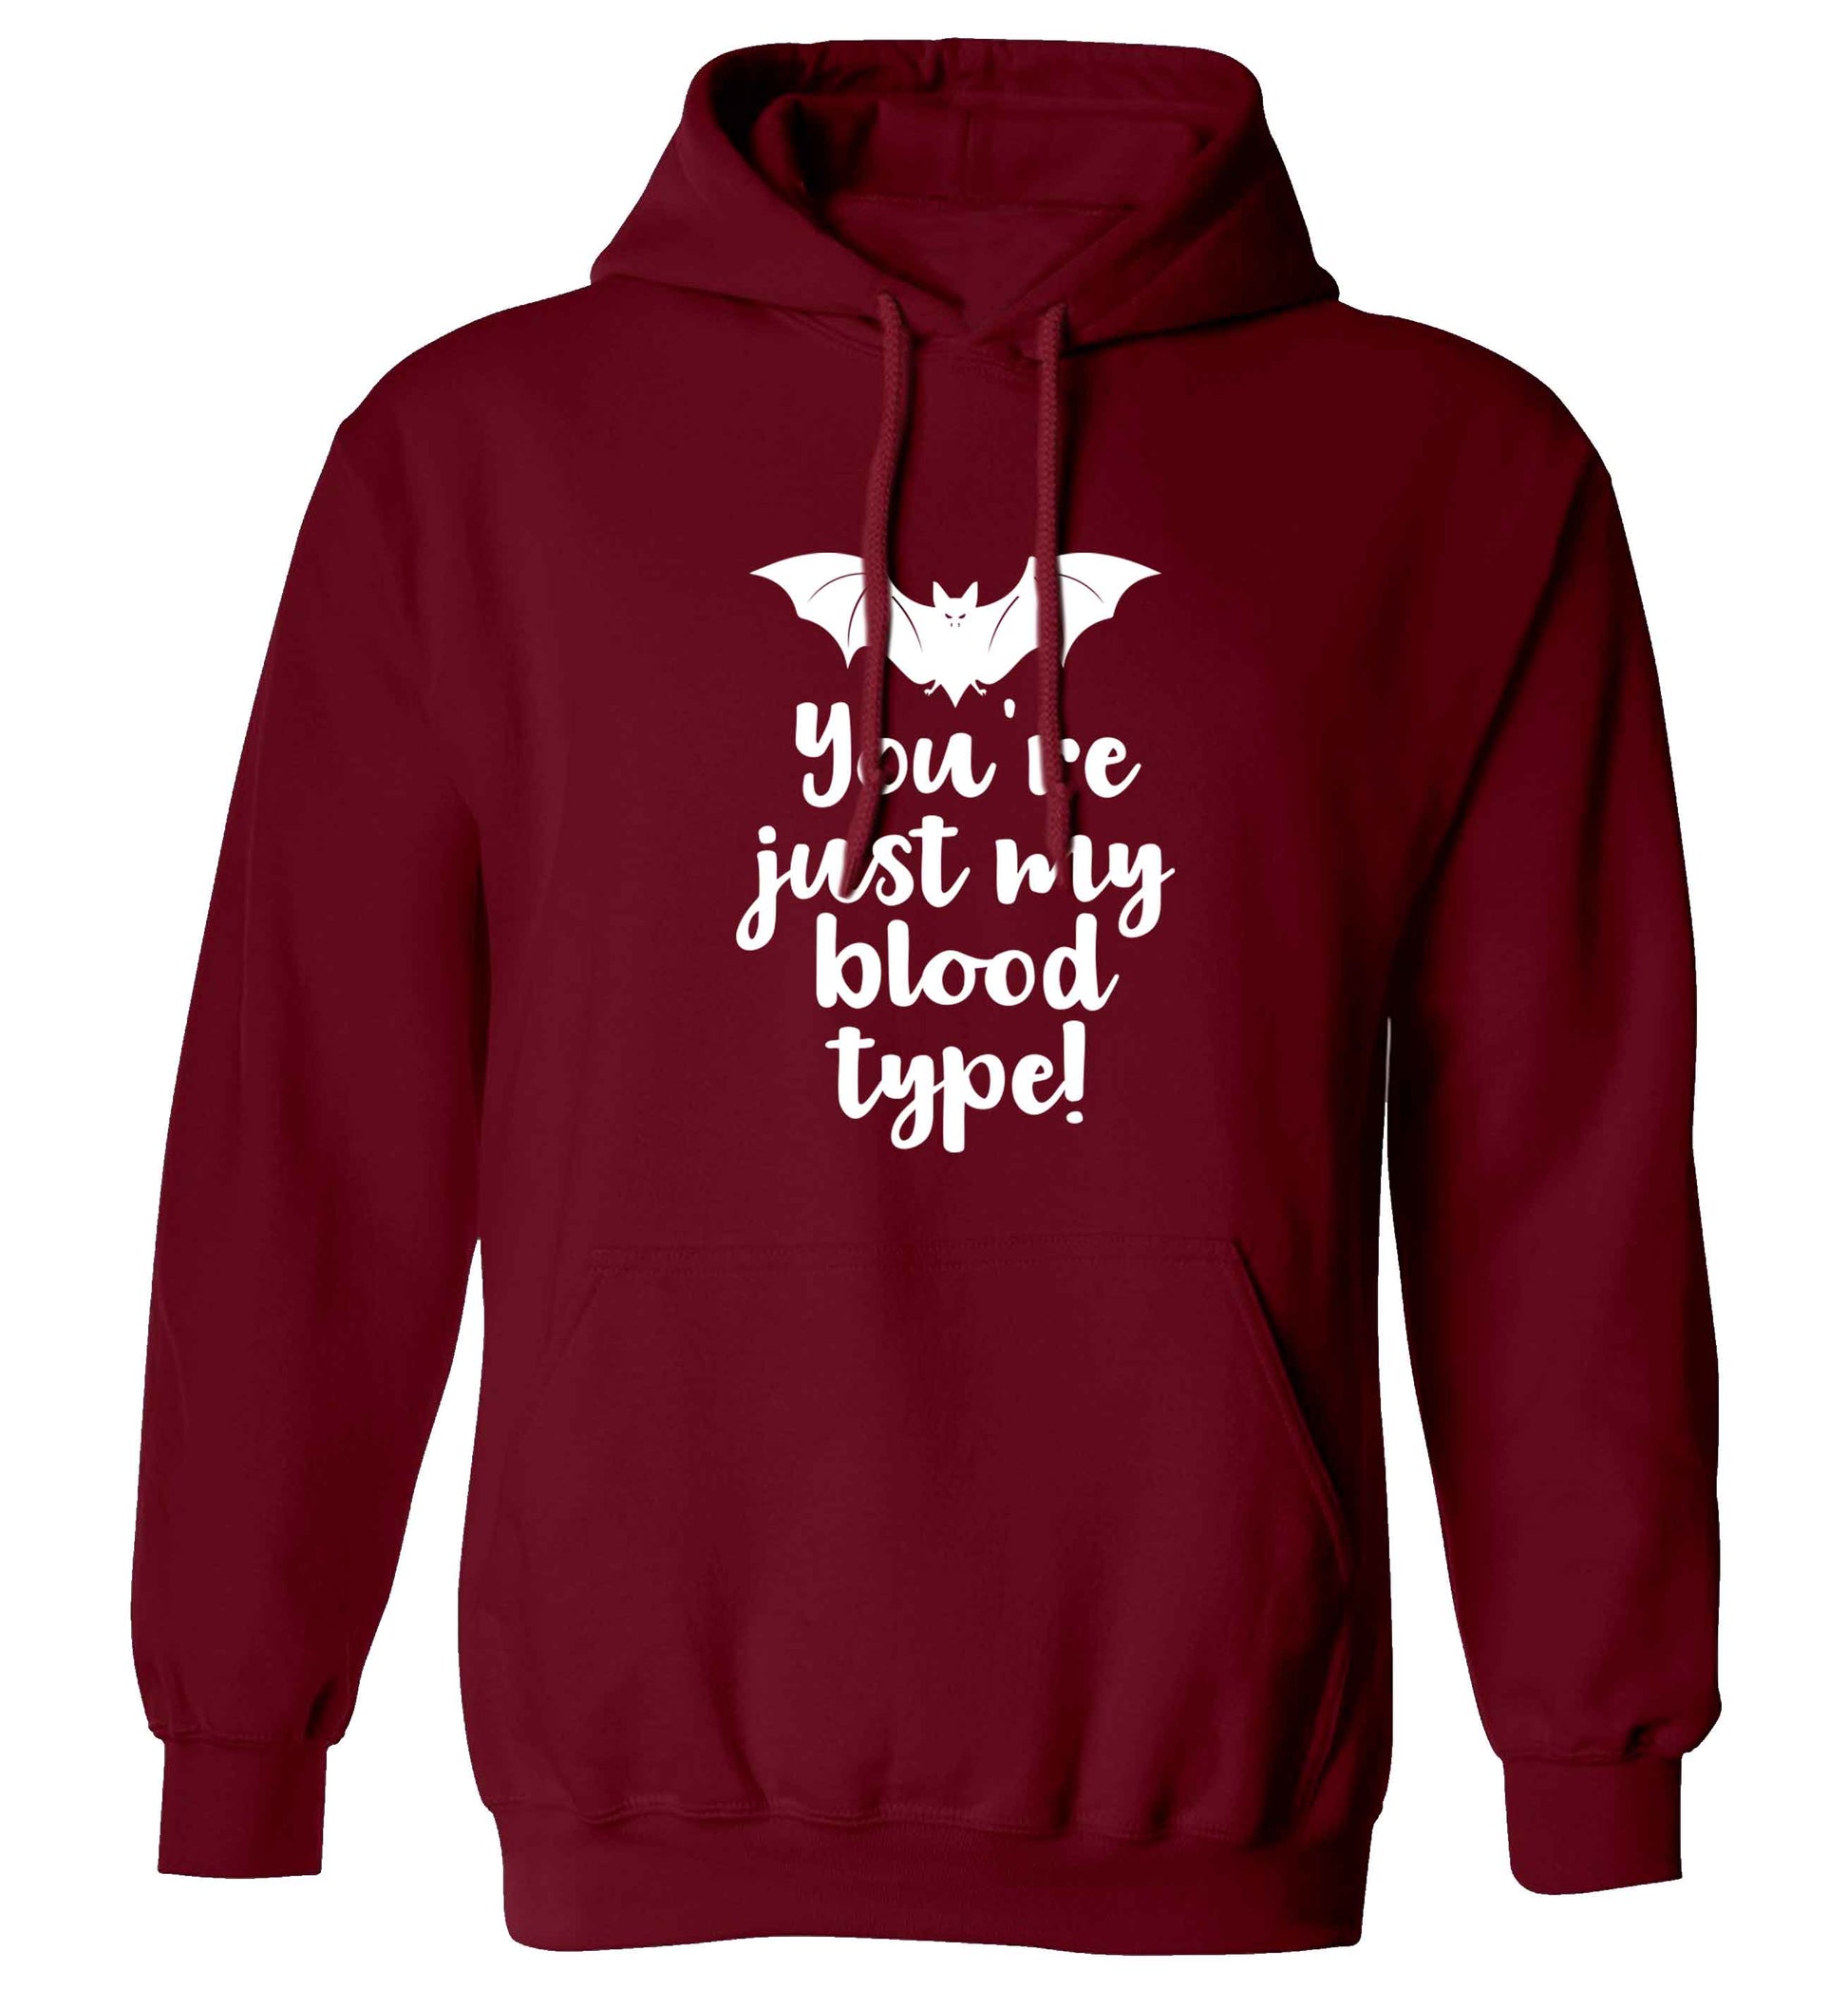 You're just my blood type adults unisex maroon hoodie 2XL